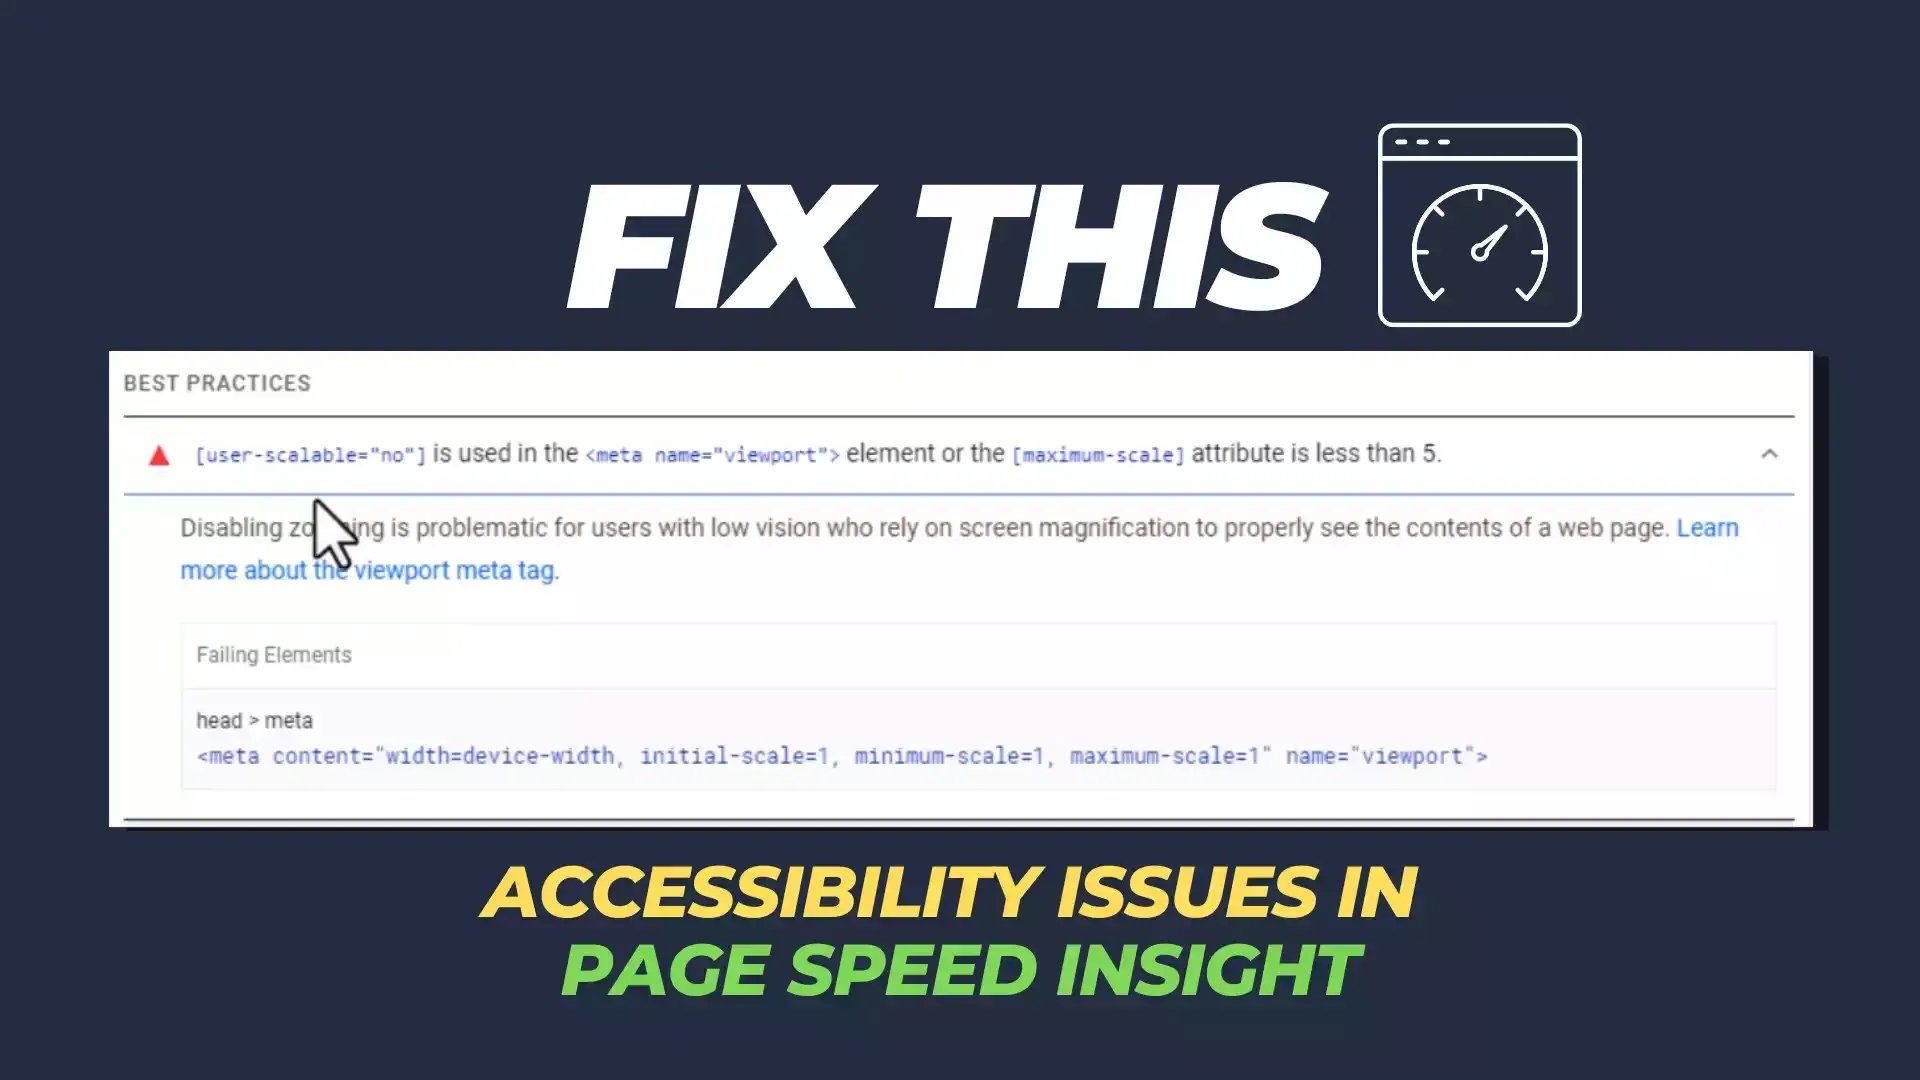 How to Fix [user-scalable="no"] is used in the meta name="viewport" element error in page speed insight